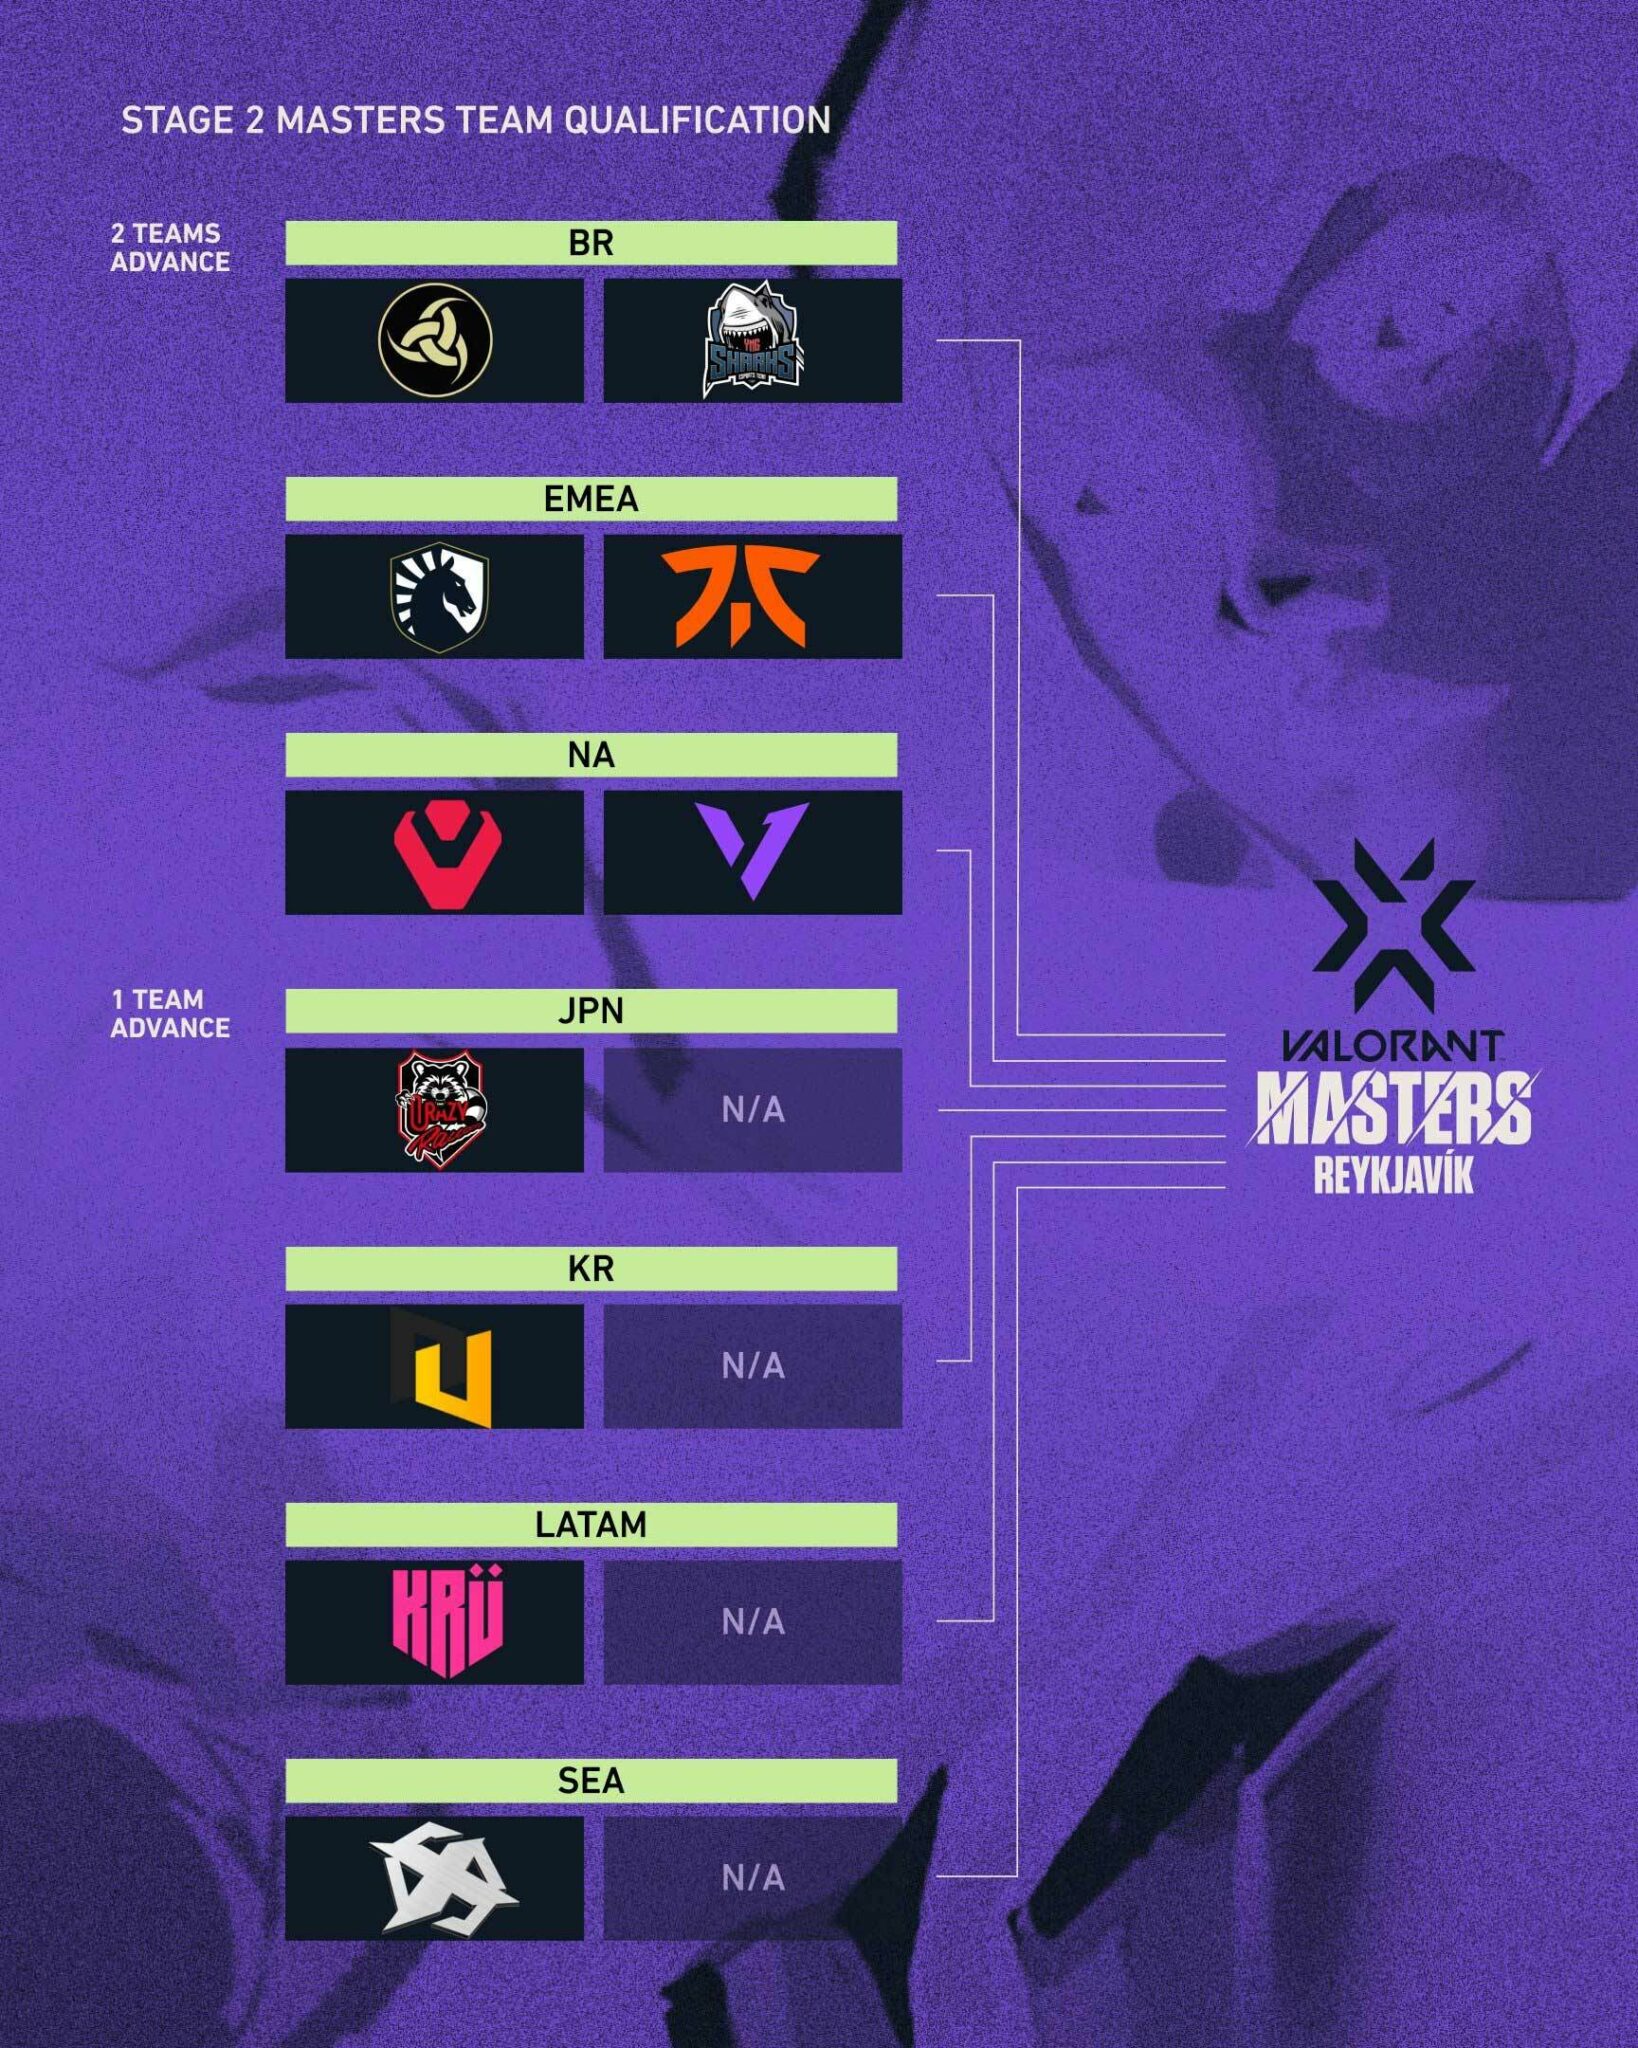 VCT Stage 2 Masters Results, schedule, format, teams, and prize pool